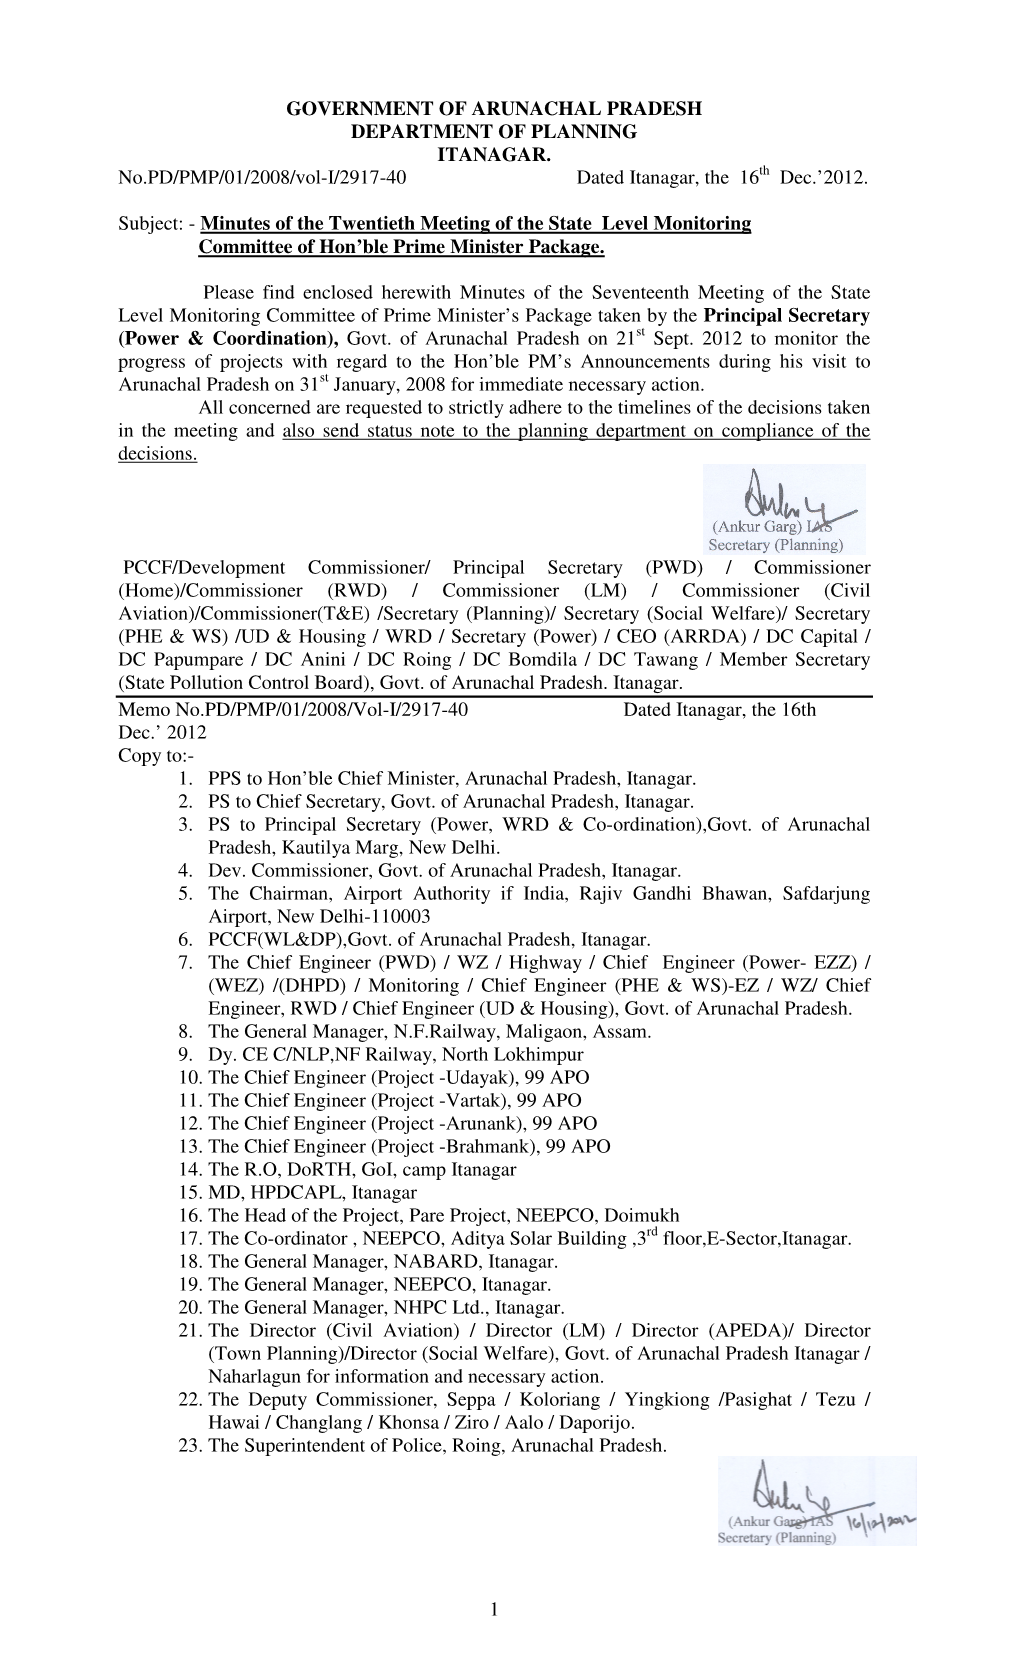 Minutes of 20Th State Level Monitoring Committee